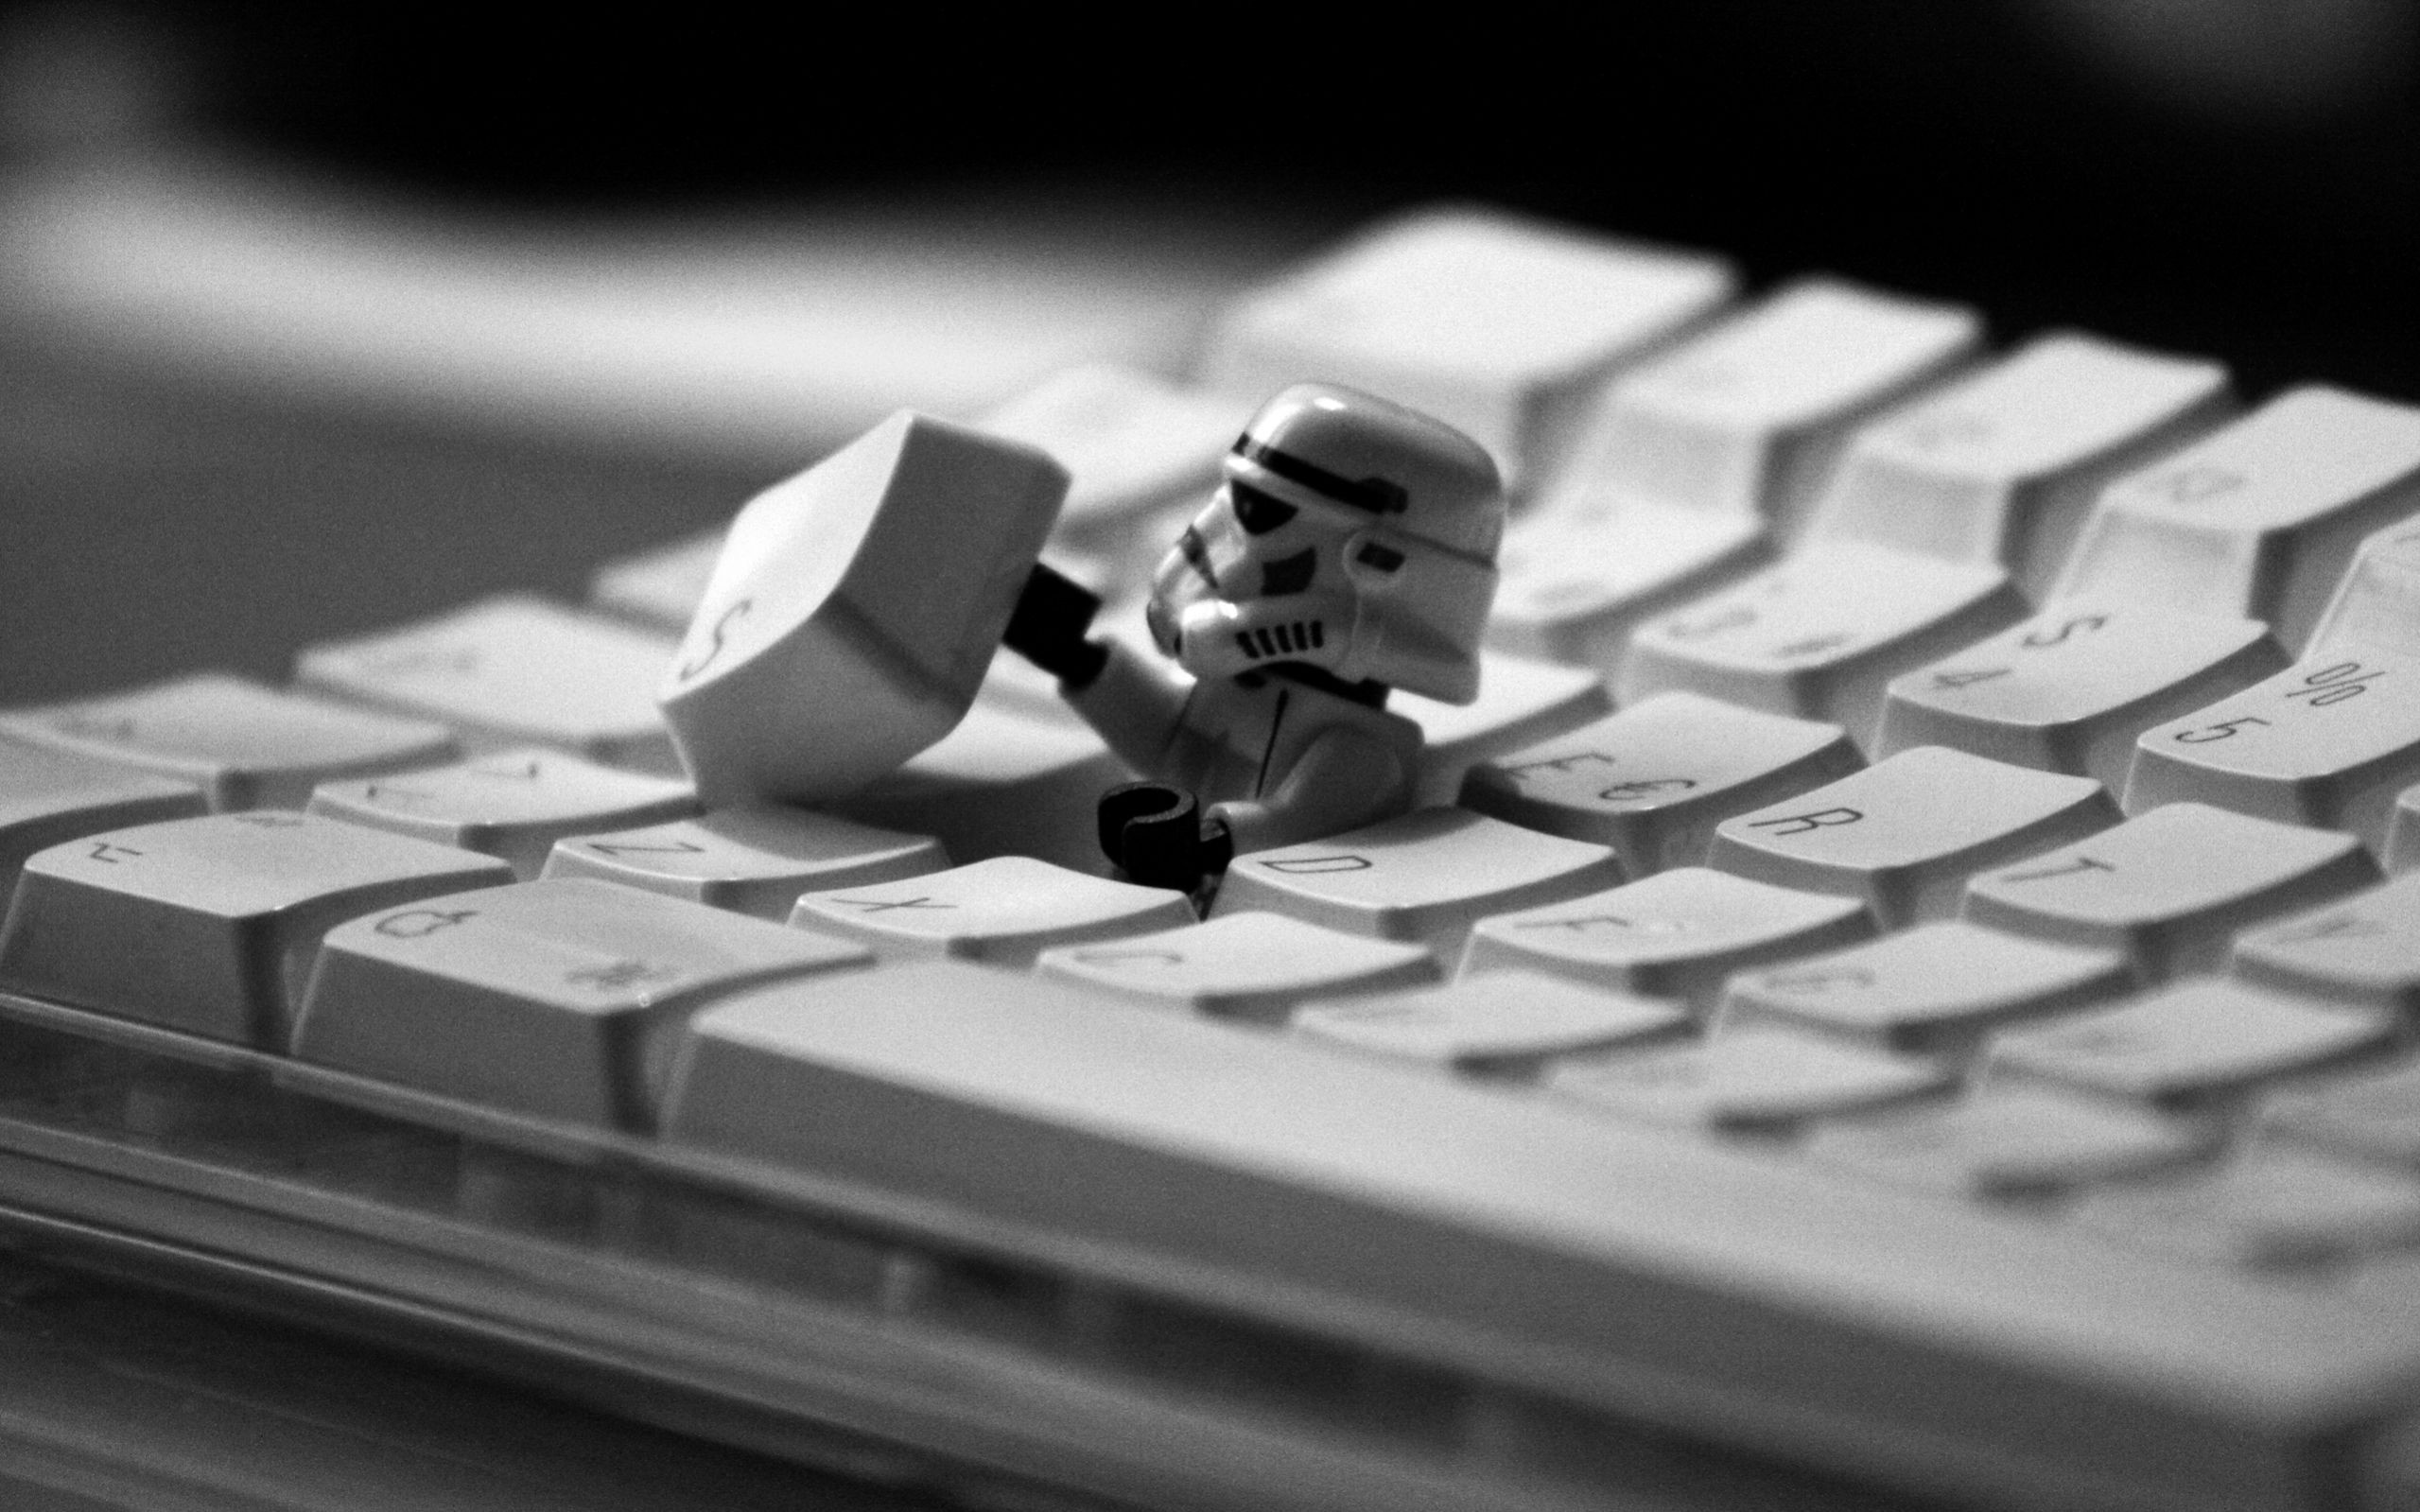 Darth Vader Comes Out From Keyboard Funny Wallpaper